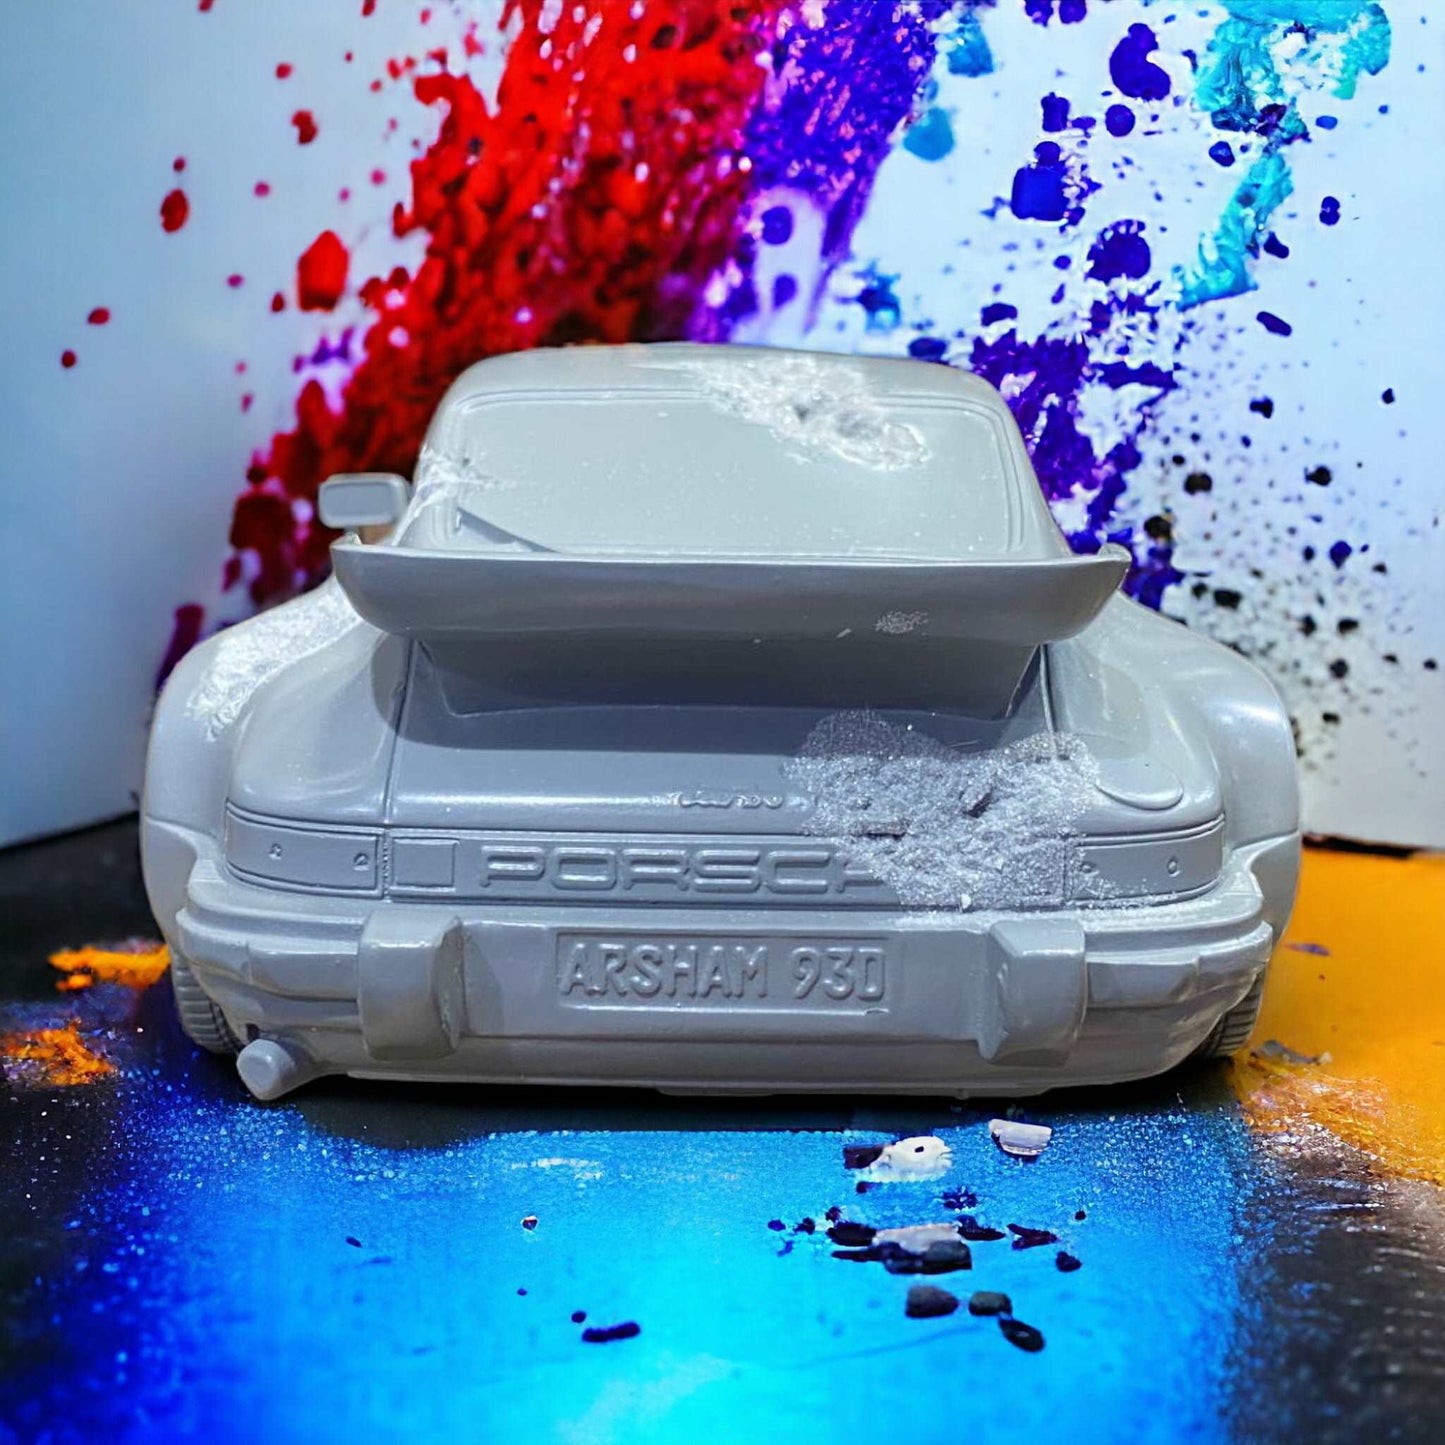 1/12 Arsham Editions Porsche Eroded 911 Turbo - Limited Edition Collectible|Sold in Dturman.com Dubai UAE.